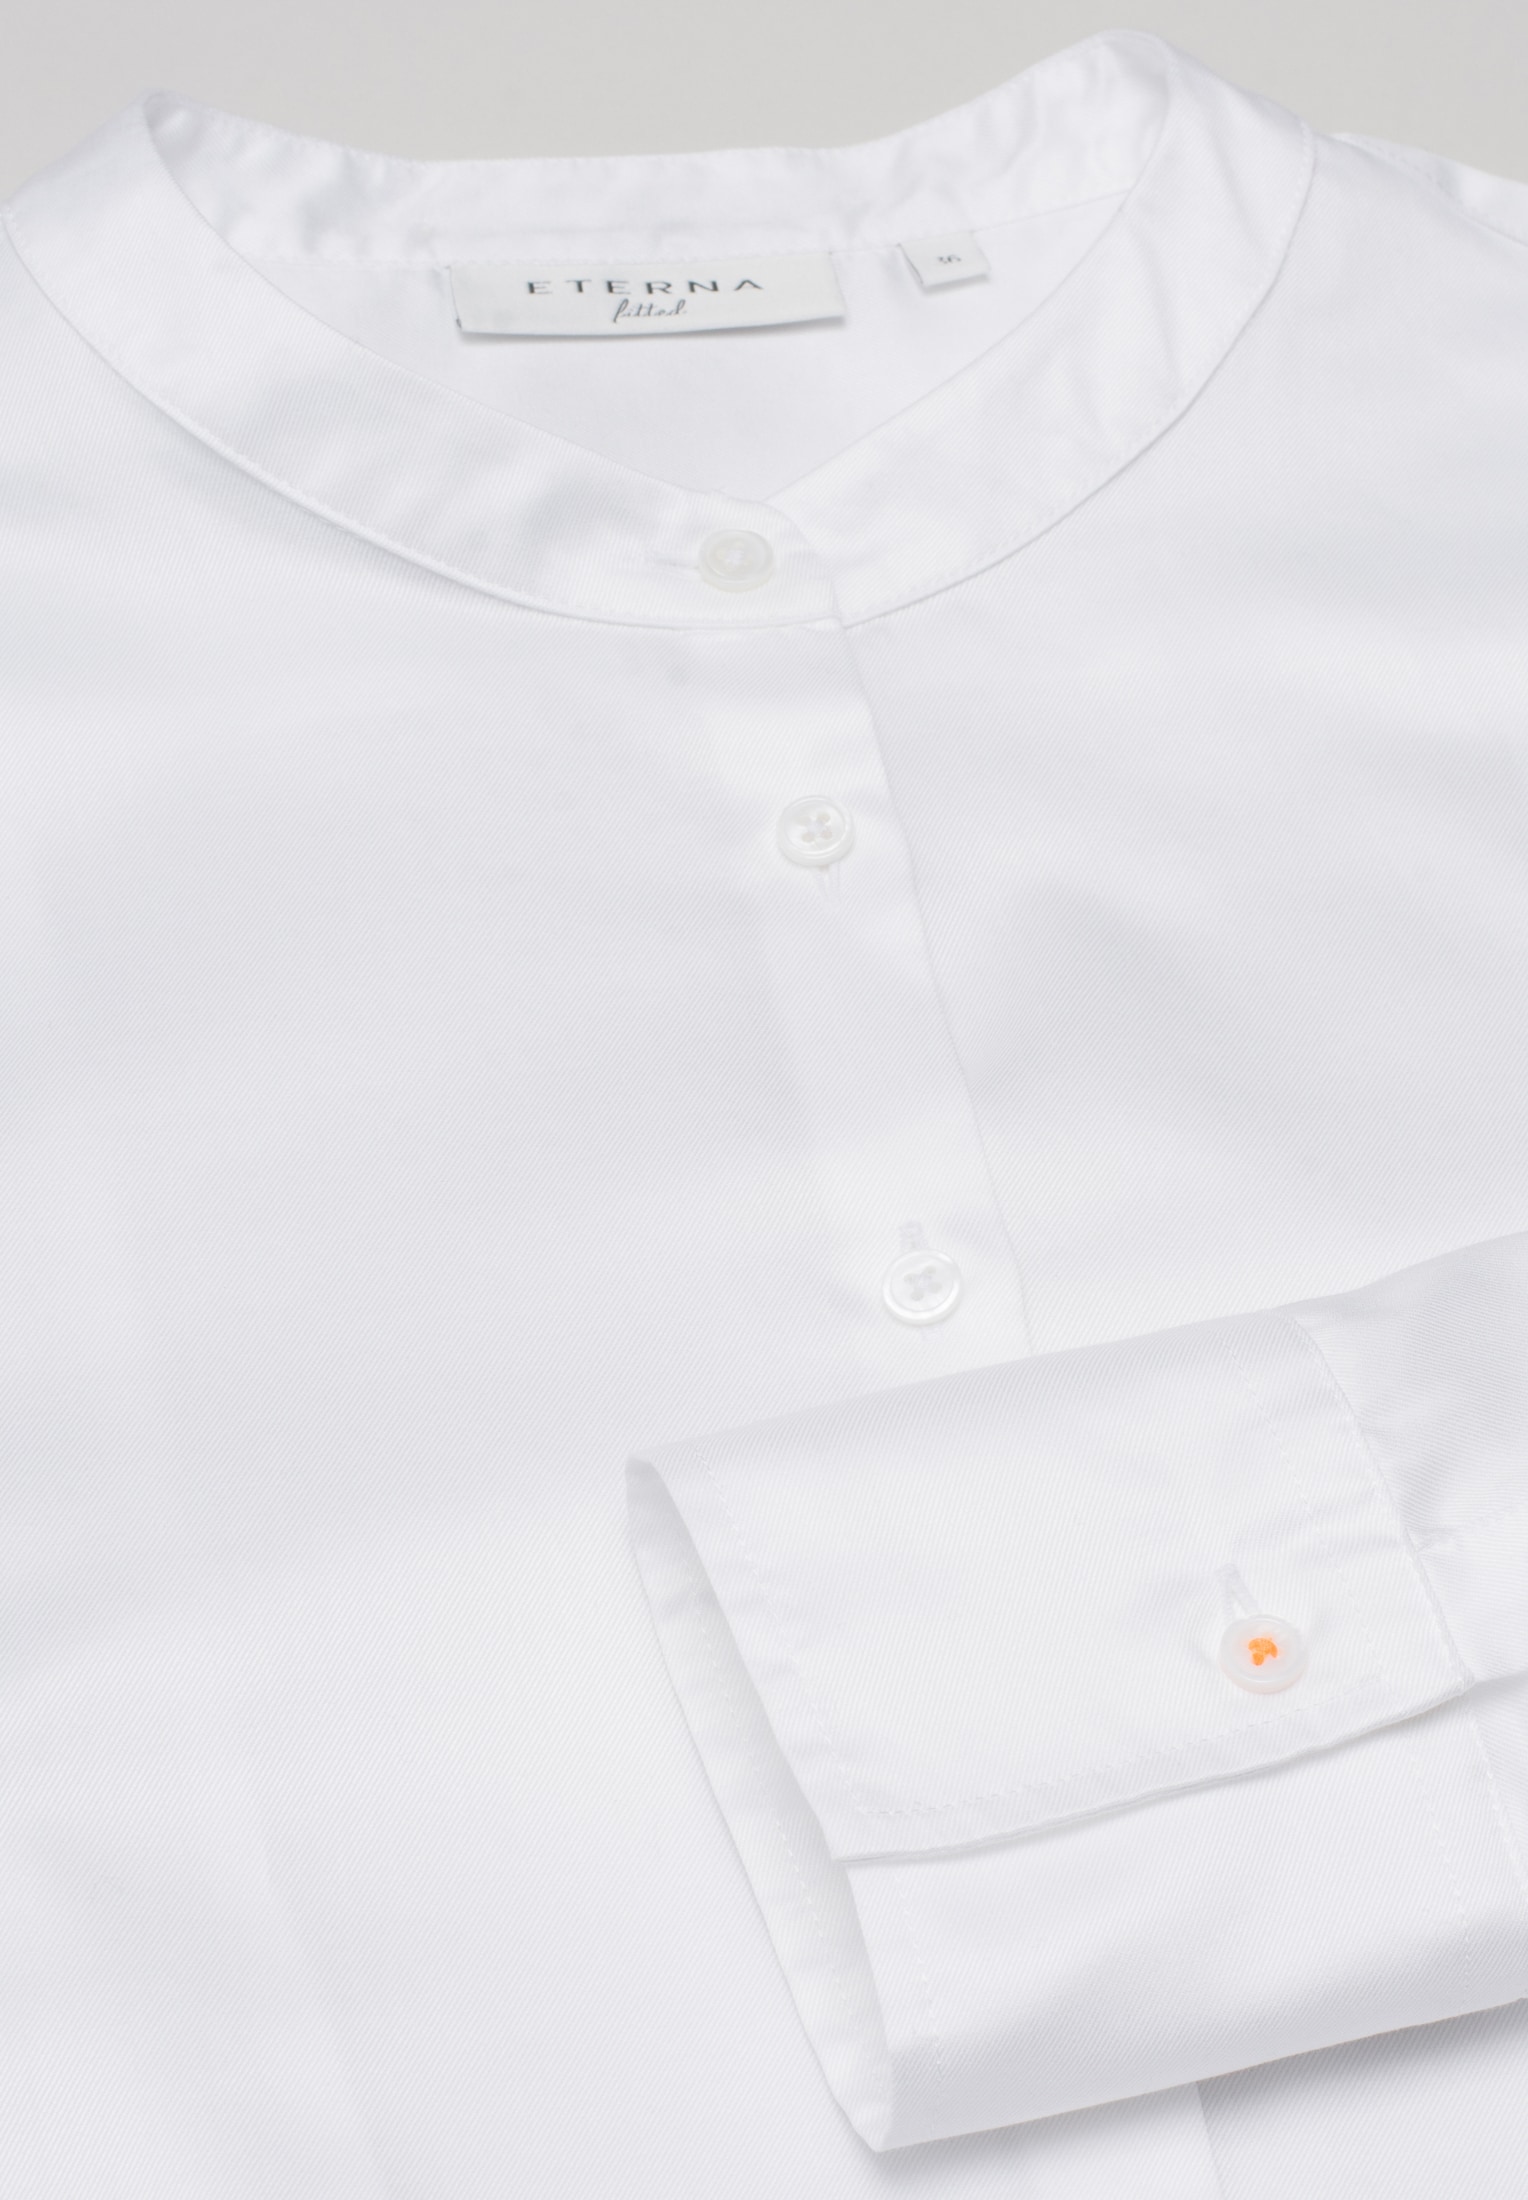 Shirt Luxury | Langarm unifarben 38 | in 2BL03742-00-02-38-1/1 | | Bluse Soft off-white off-white